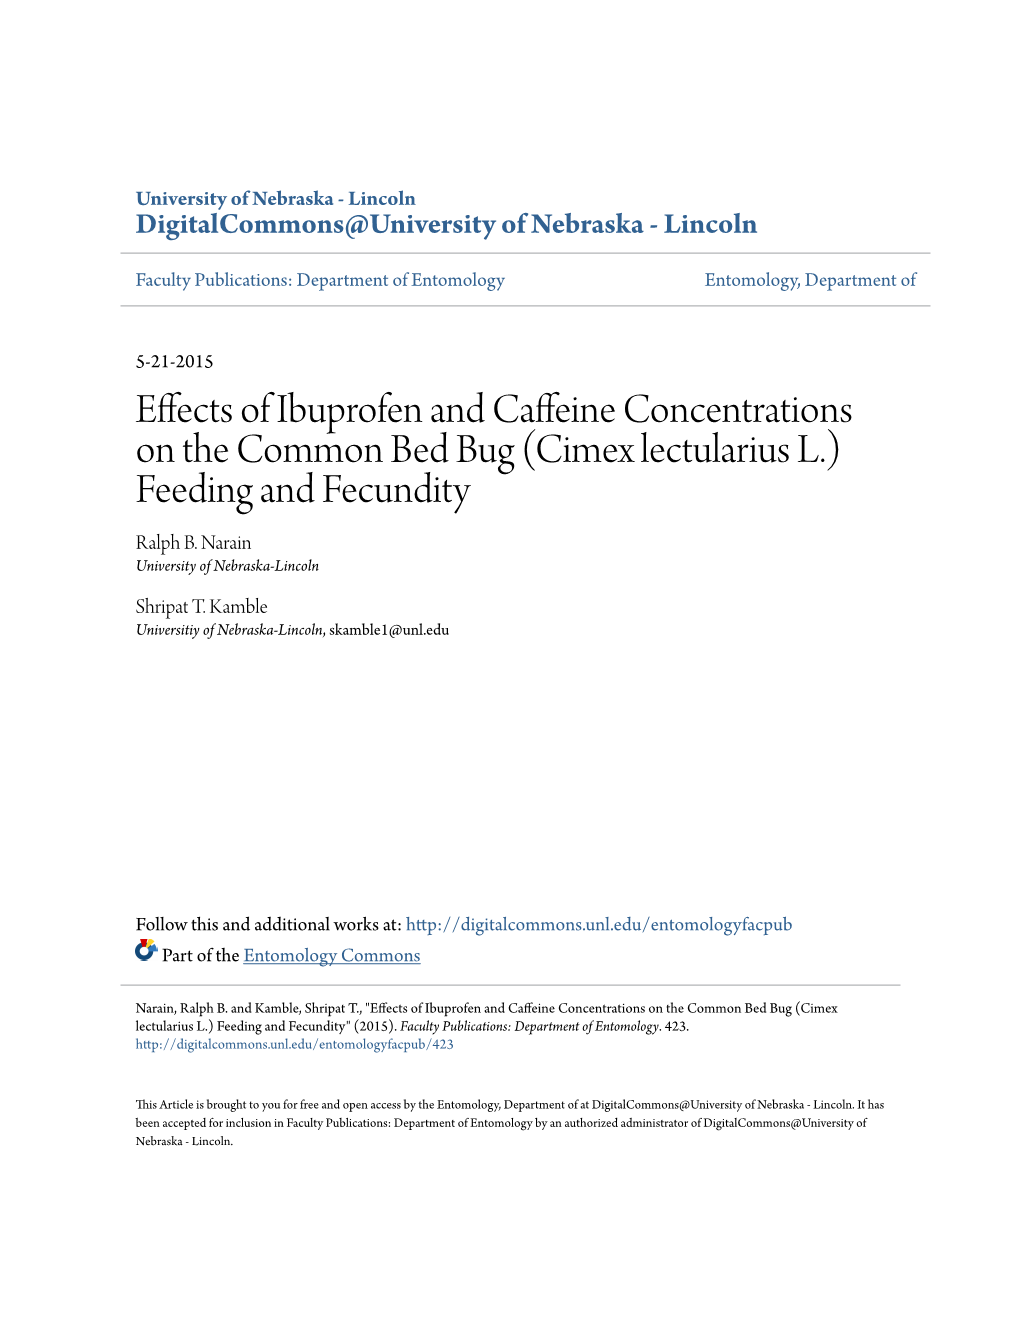 Effects of Ibuprofen and Caffeine Concentrations on the Common Bed Bug (Cimex Lectularius L.) Feeding and Fecundity Ralph B Narain and Shripat T Kamble*